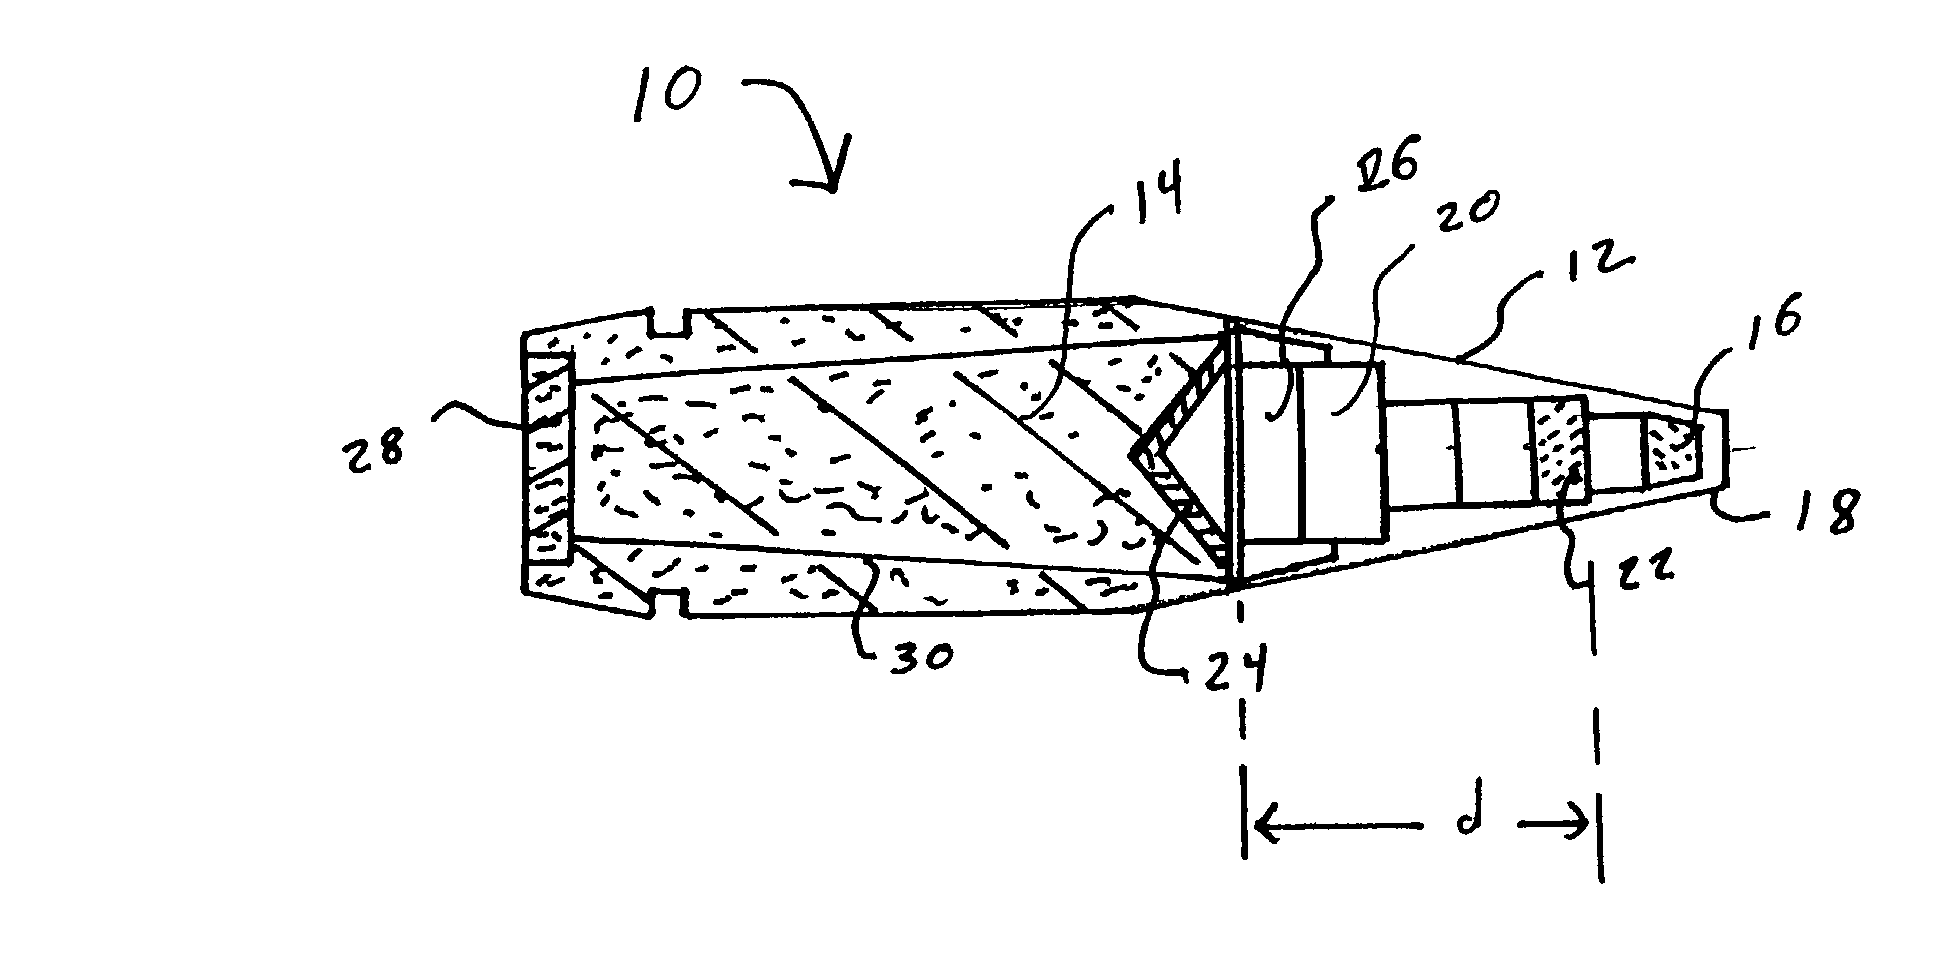 Medium caliber high explosive dual-purpose projectile with dual function fuze